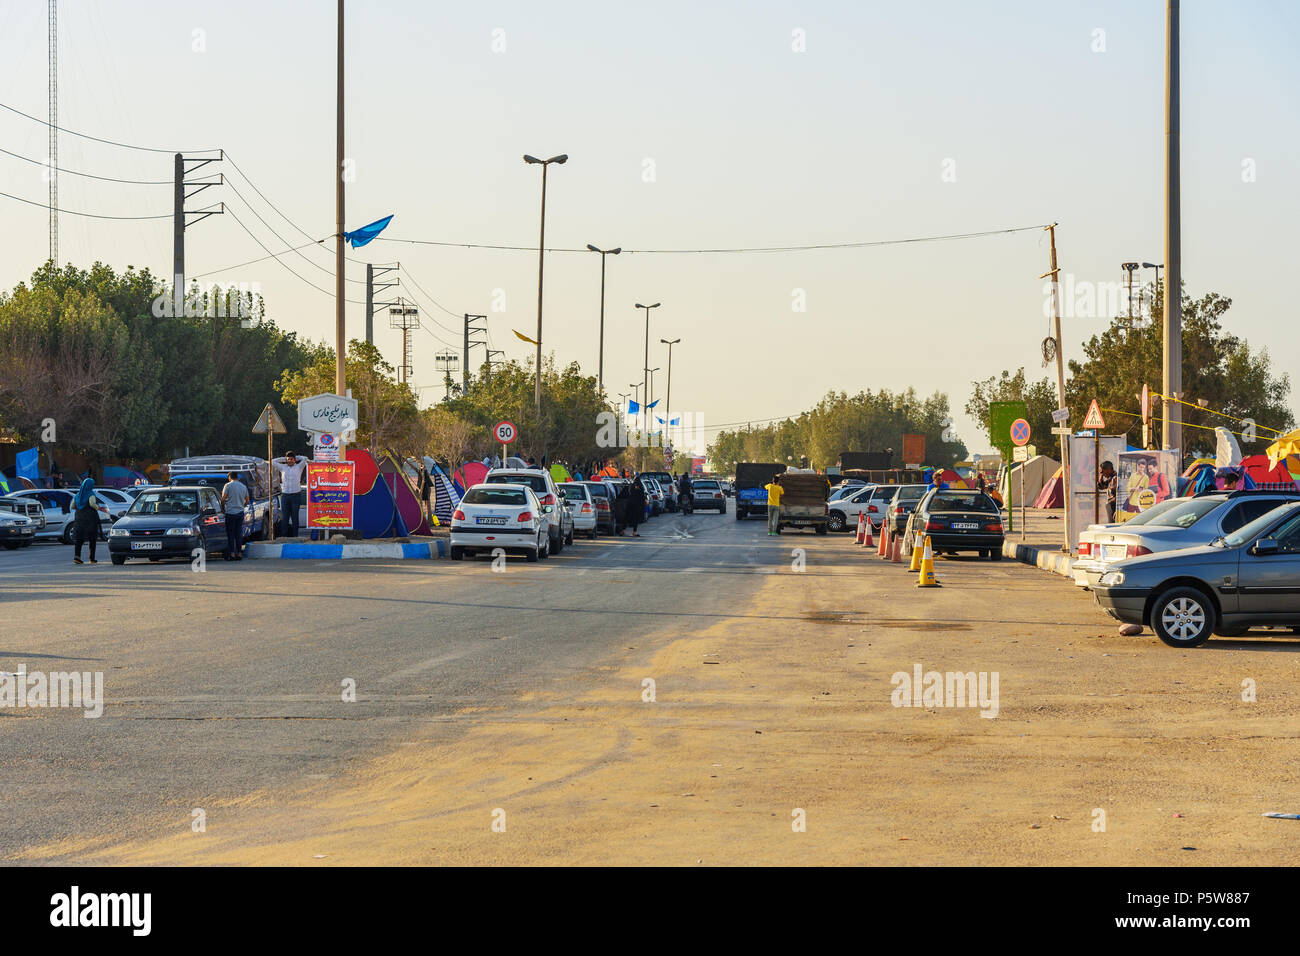 Bandar Ganaveh, Bushehr Province, Iran - March 27, 2018: Iranian travelers living in tents on the beach at Persian Gulf. A lot of Iranians traveling d Stock Photo